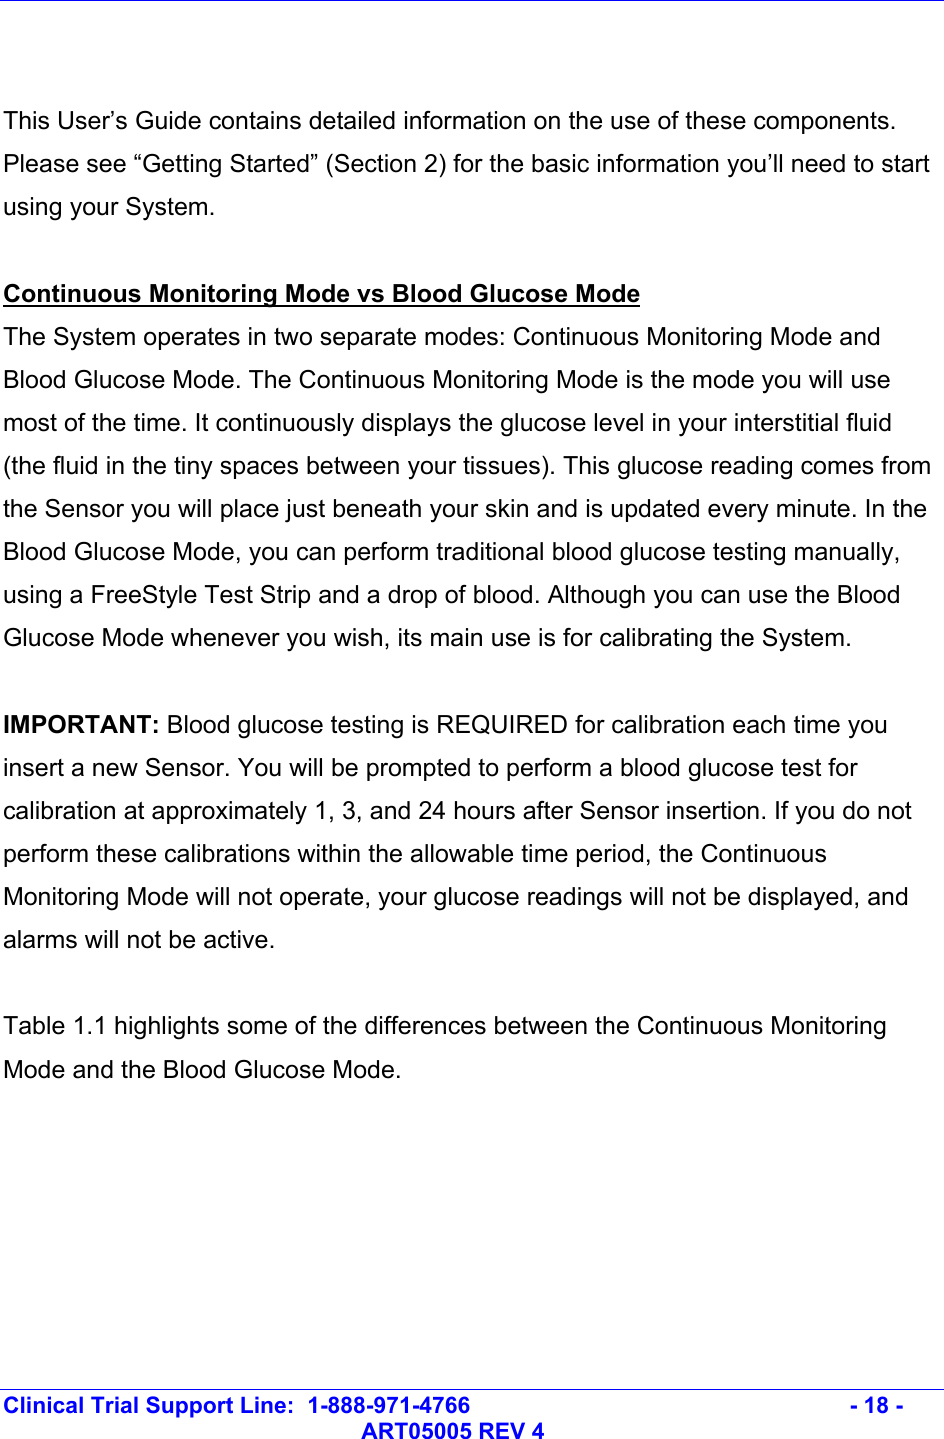   Clinical Trial Support Line:  1-888-971-4766   - 18 -   ART05005 REV 4   This User’s Guide contains detailed information on the use of these components. Please see “Getting Started” (Section 2) for the basic information you’ll need to start using your System.  Continuous Monitoring Mode vs Blood Glucose Mode The System operates in two separate modes: Continuous Monitoring Mode and Blood Glucose Mode. The Continuous Monitoring Mode is the mode you will use most of the time. It continuously displays the glucose level in your interstitial fluid (the fluid in the tiny spaces between your tissues). This glucose reading comes from the Sensor you will place just beneath your skin and is updated every minute. In the Blood Glucose Mode, you can perform traditional blood glucose testing manually, using a FreeStyle Test Strip and a drop of blood. Although you can use the Blood Glucose Mode whenever you wish, its main use is for calibrating the System.   IMPORTANT: Blood glucose testing is REQUIRED for calibration each time you insert a new Sensor. You will be prompted to perform a blood glucose test for calibration at approximately 1, 3, and 24 hours after Sensor insertion. If you do not perform these calibrations within the allowable time period, the Continuous Monitoring Mode will not operate, your glucose readings will not be displayed, and alarms will not be active.  Table 1.1 highlights some of the differences between the Continuous Monitoring Mode and the Blood Glucose Mode.   